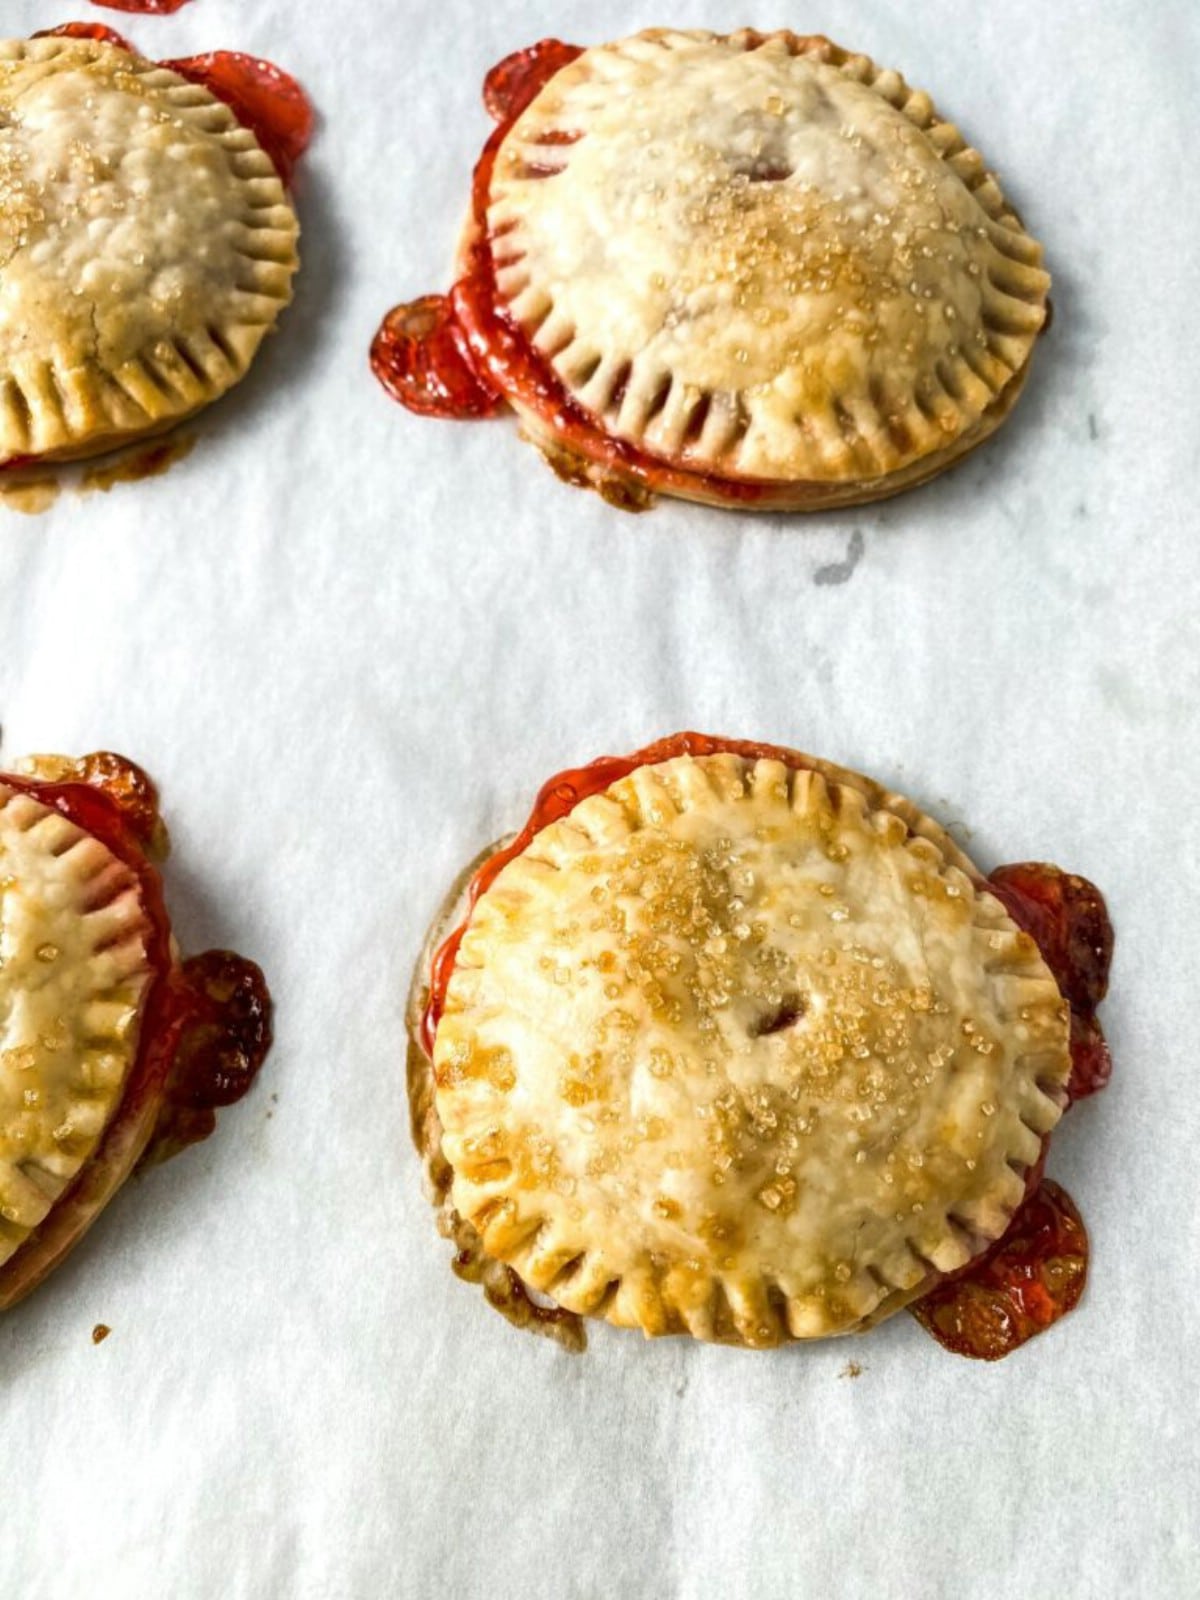 Strawberry hand pies on parchment paper